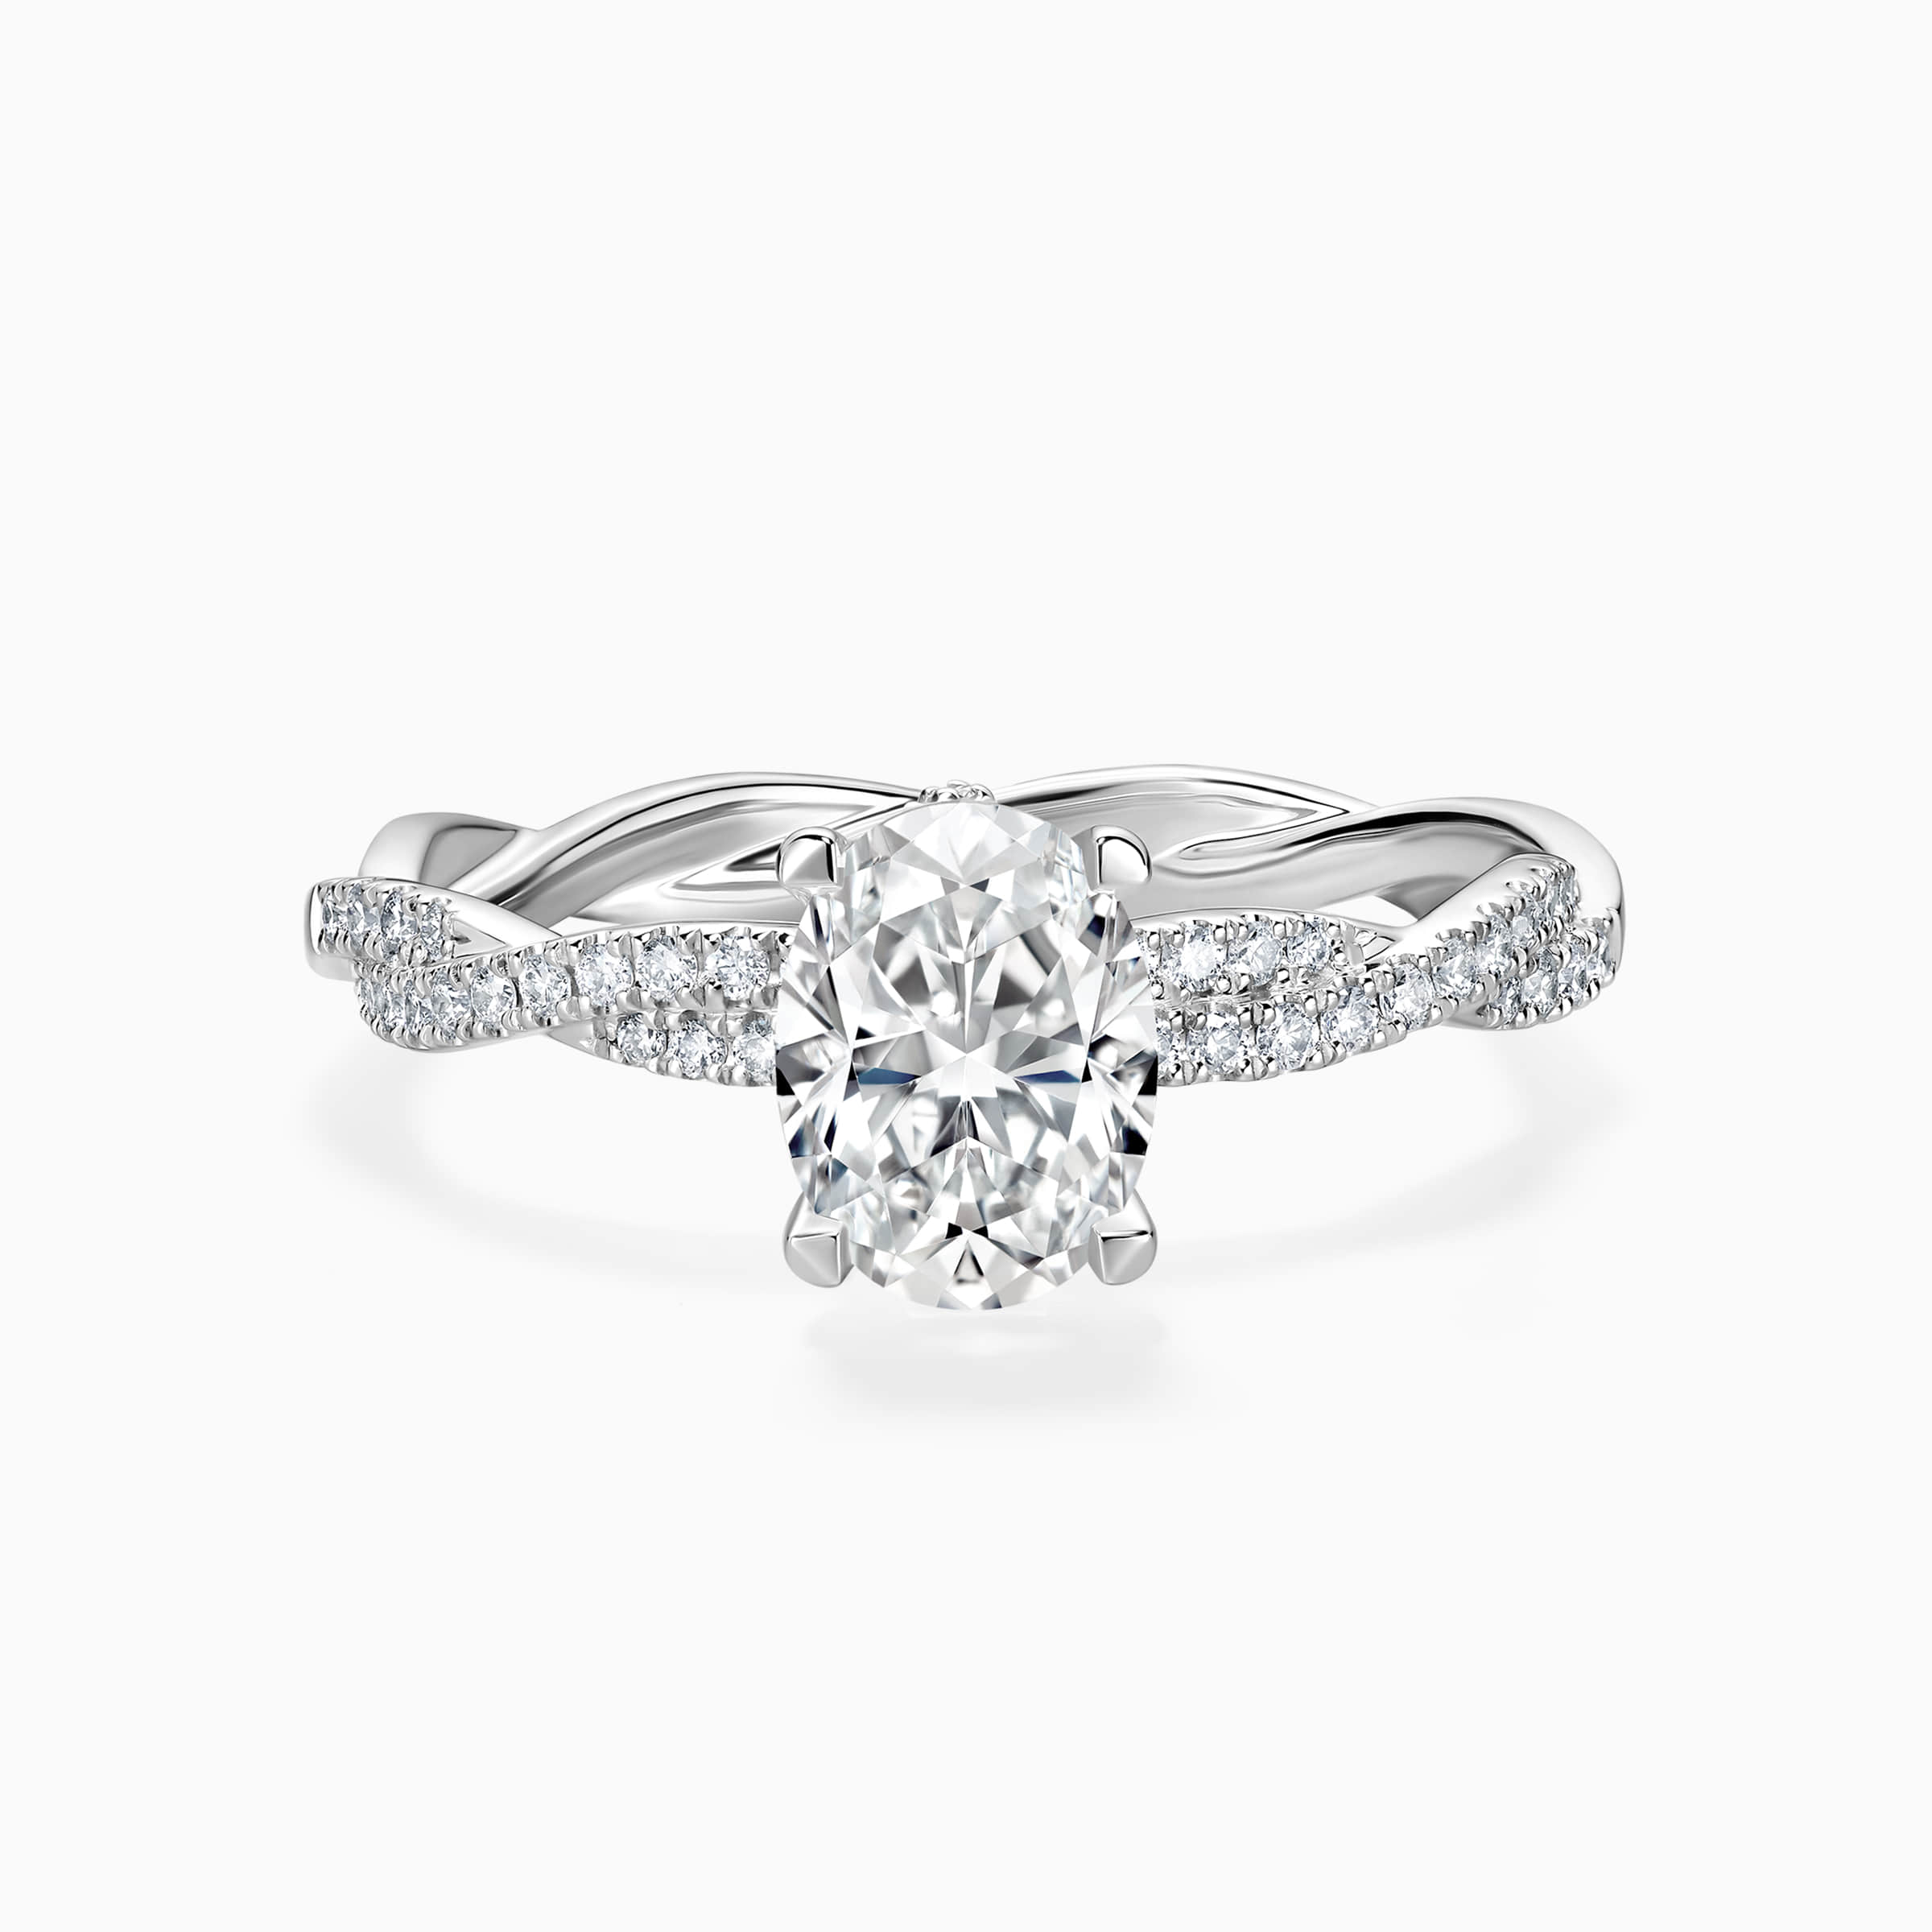 Darry Ring oval diamond engagement ring in white gold